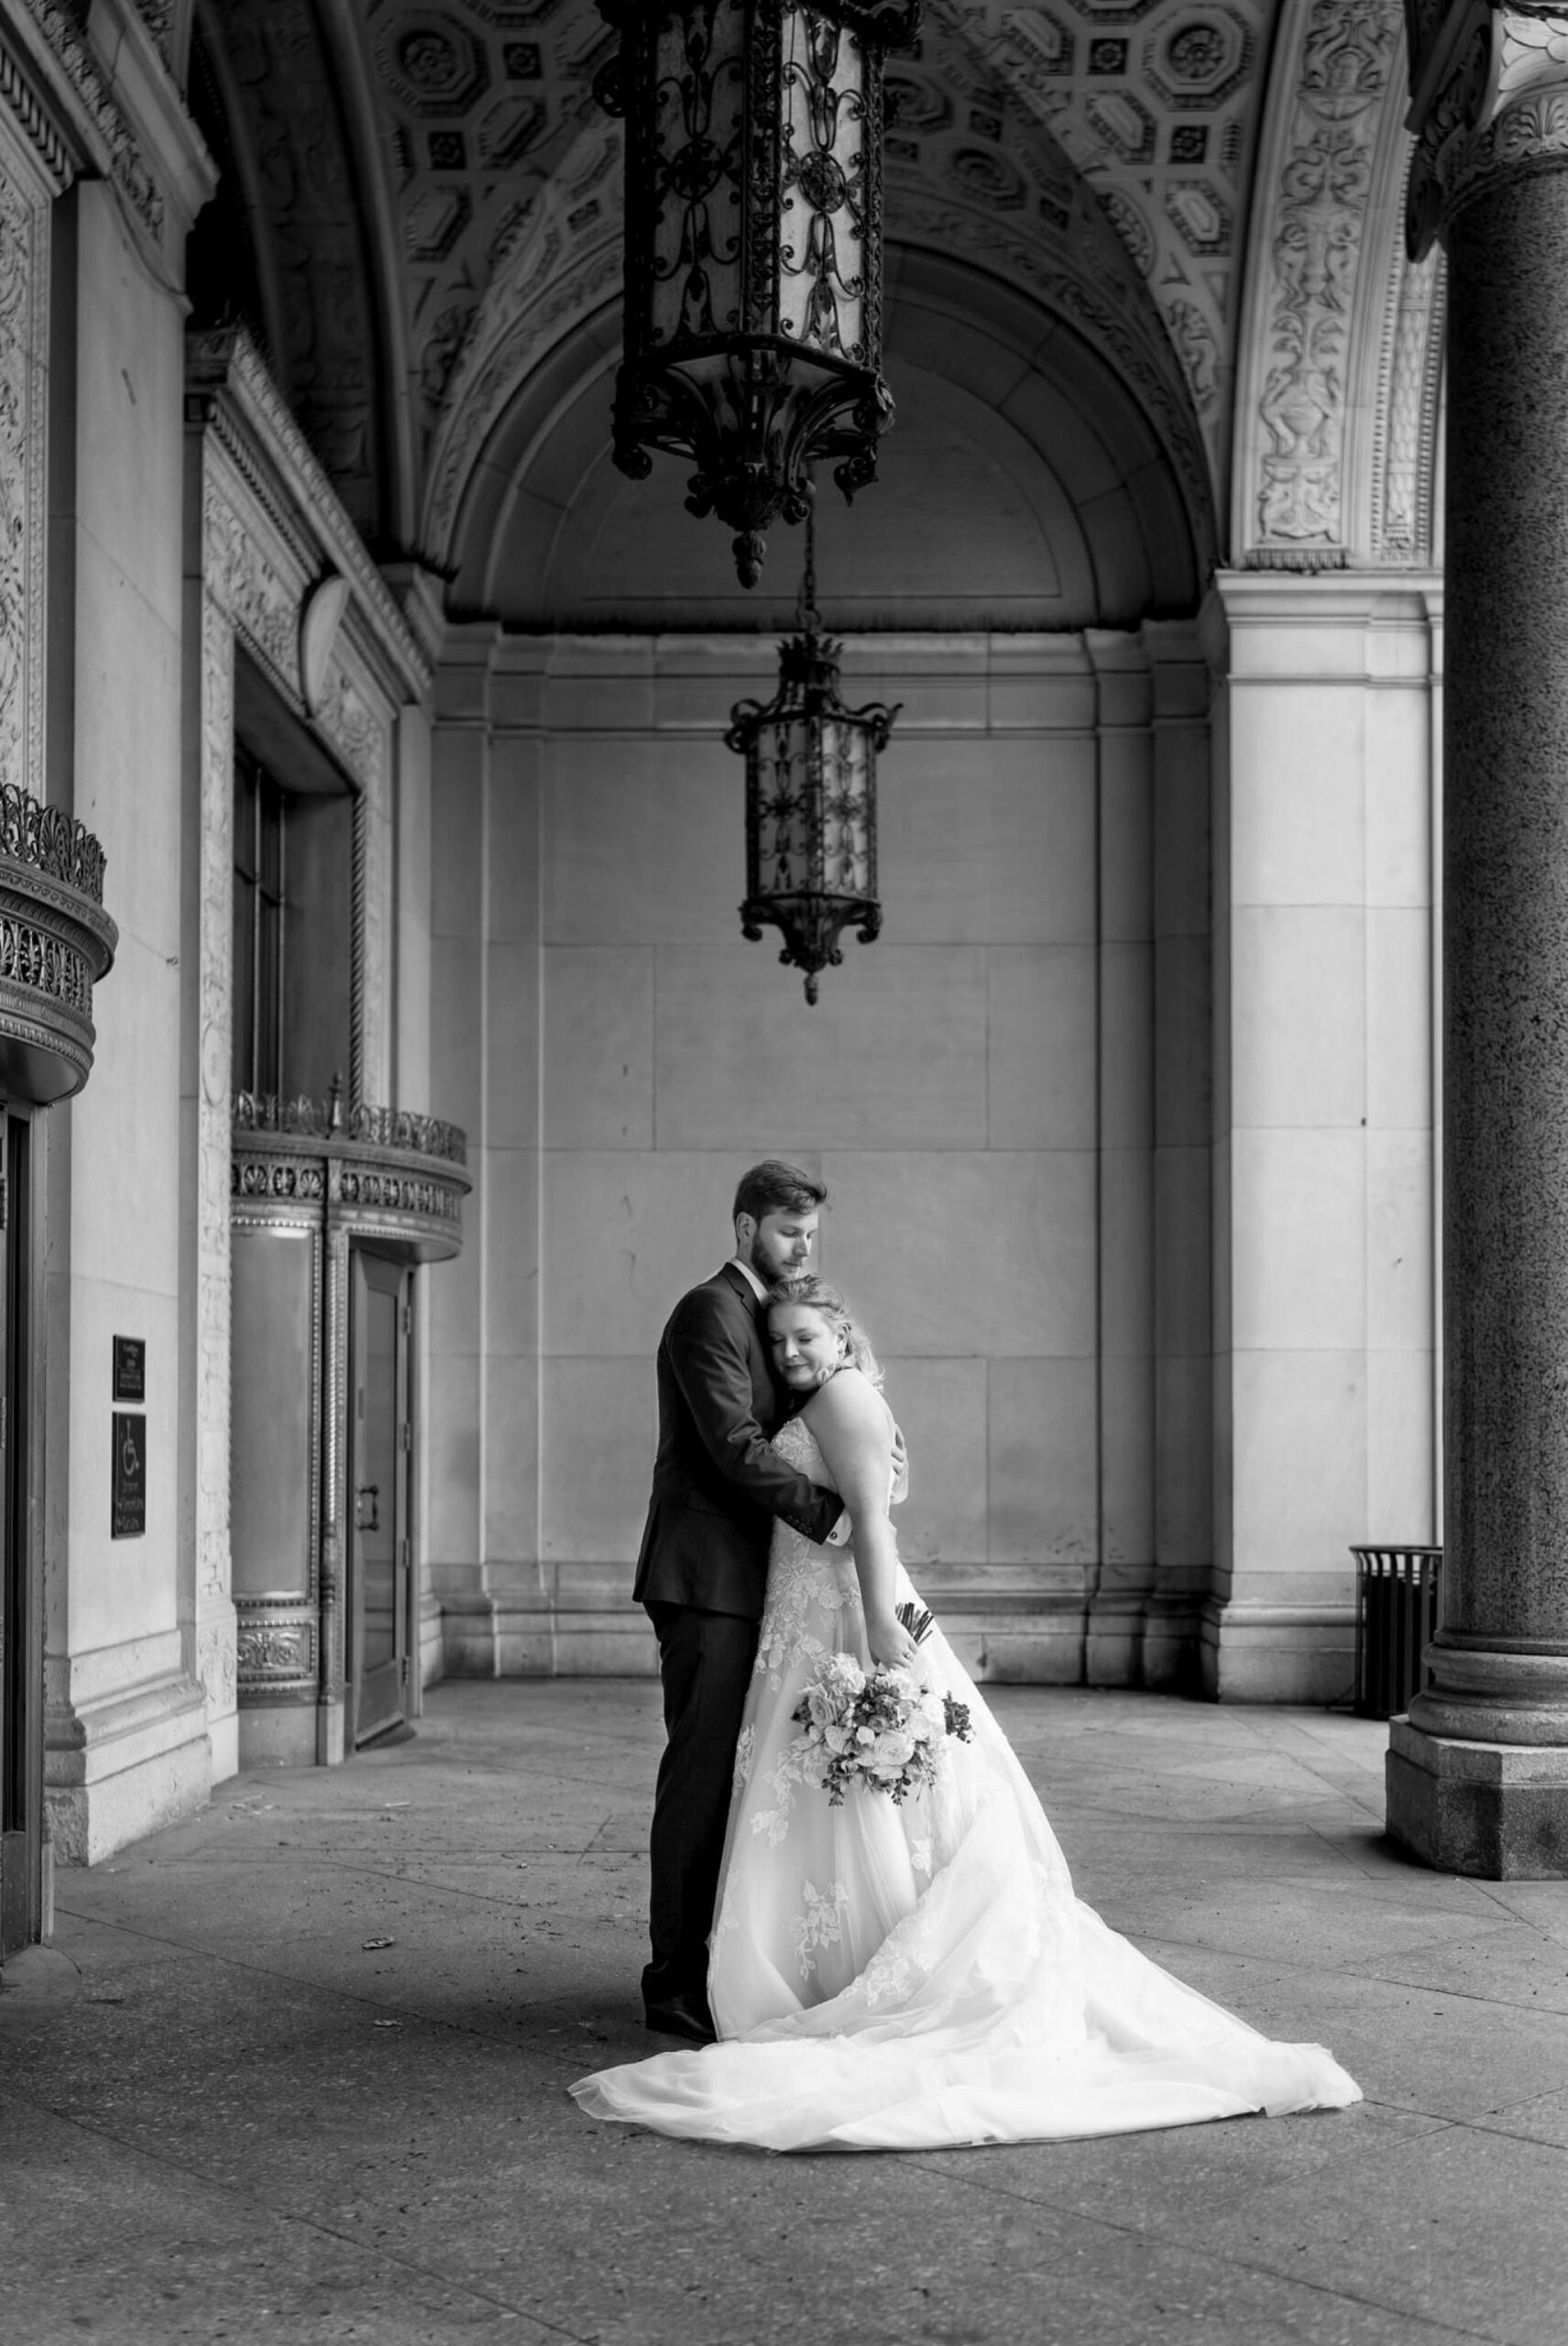 A couple embrace in a quiet moment on their wedding day at the Cadillac Place Apartments.  